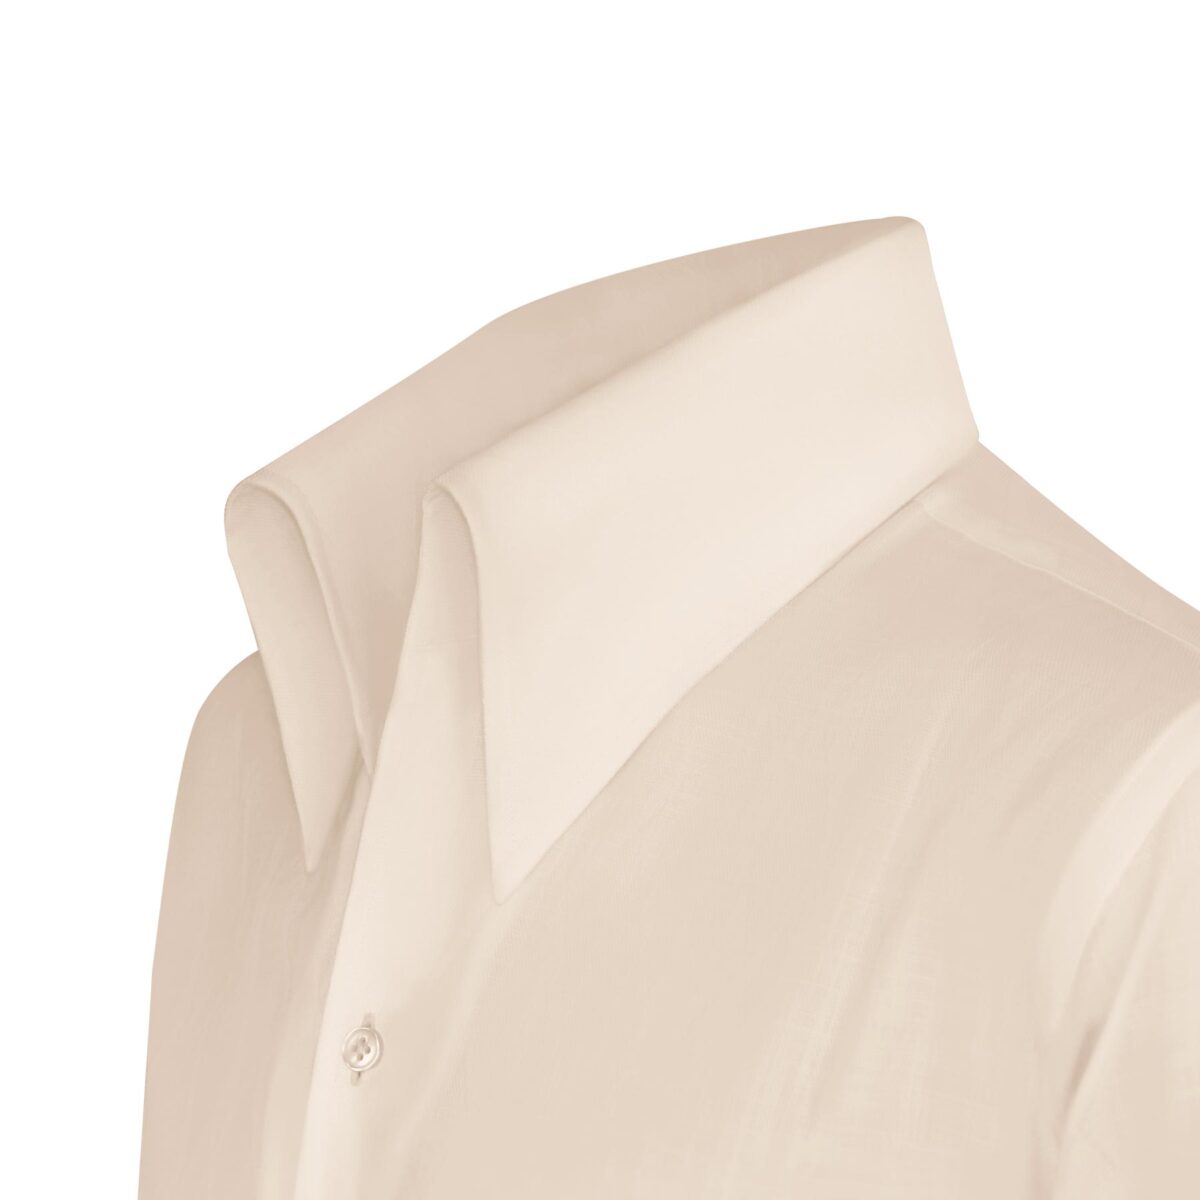 High Button down Collar Shirts - invisible button shirts, Unique Collars by John Clothier London -your custom shirt maker